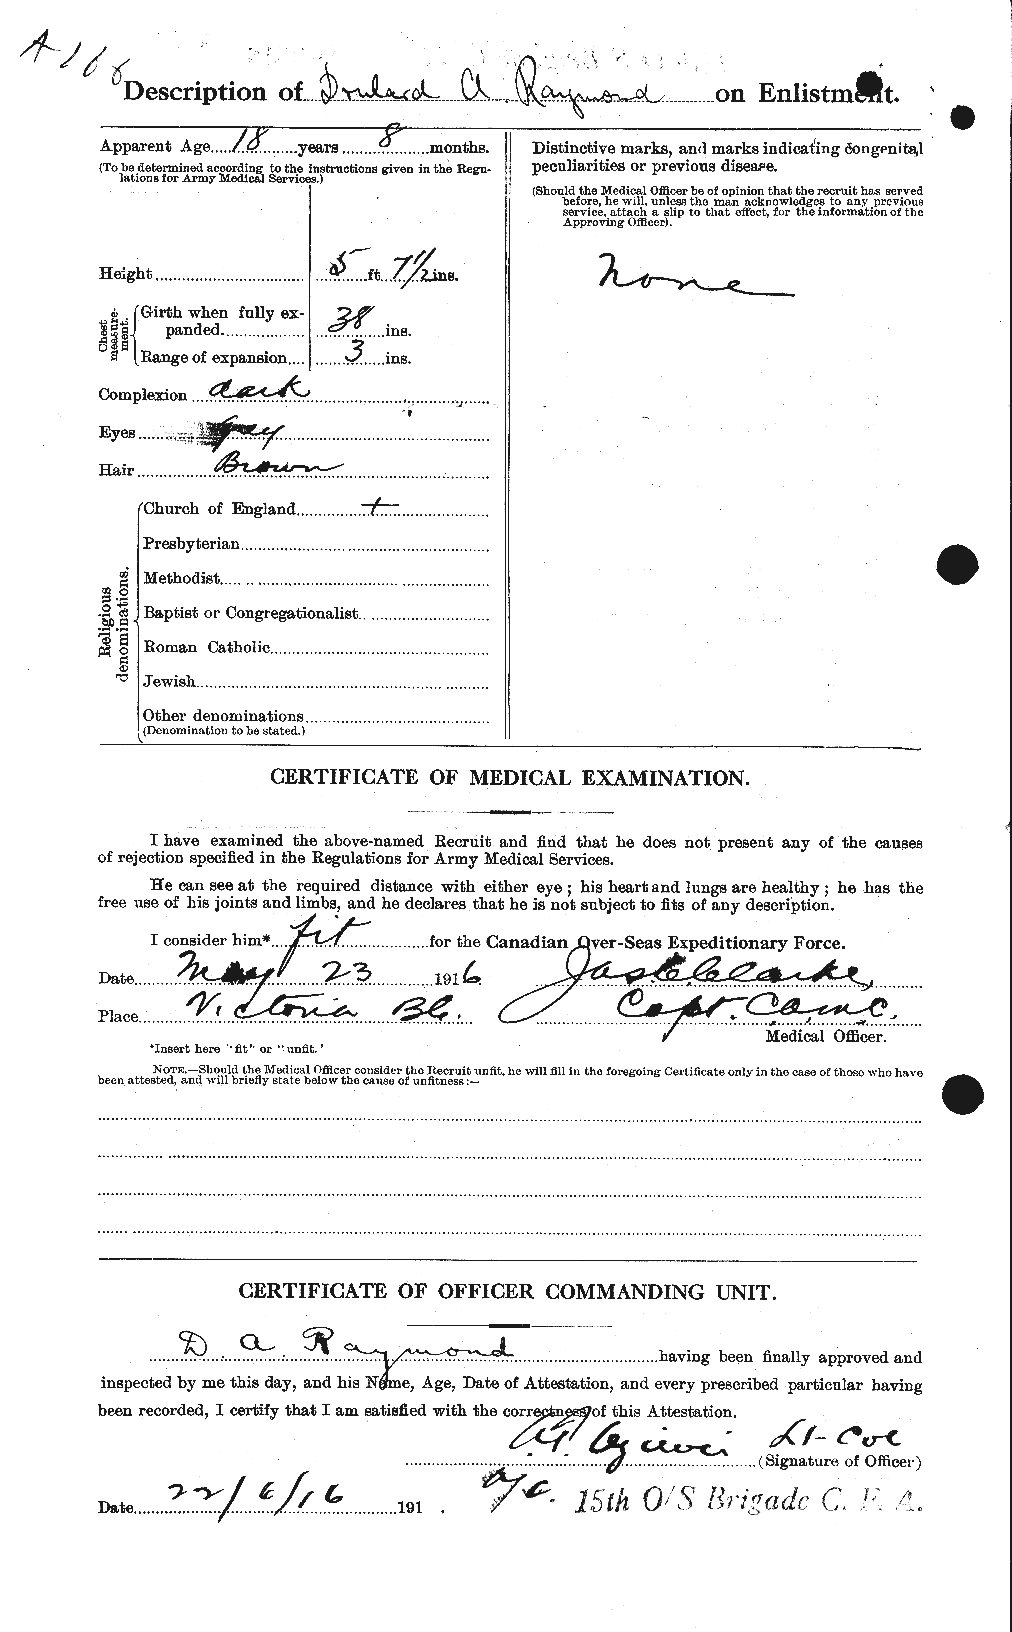 Personnel Records of the First World War - CEF 595301b